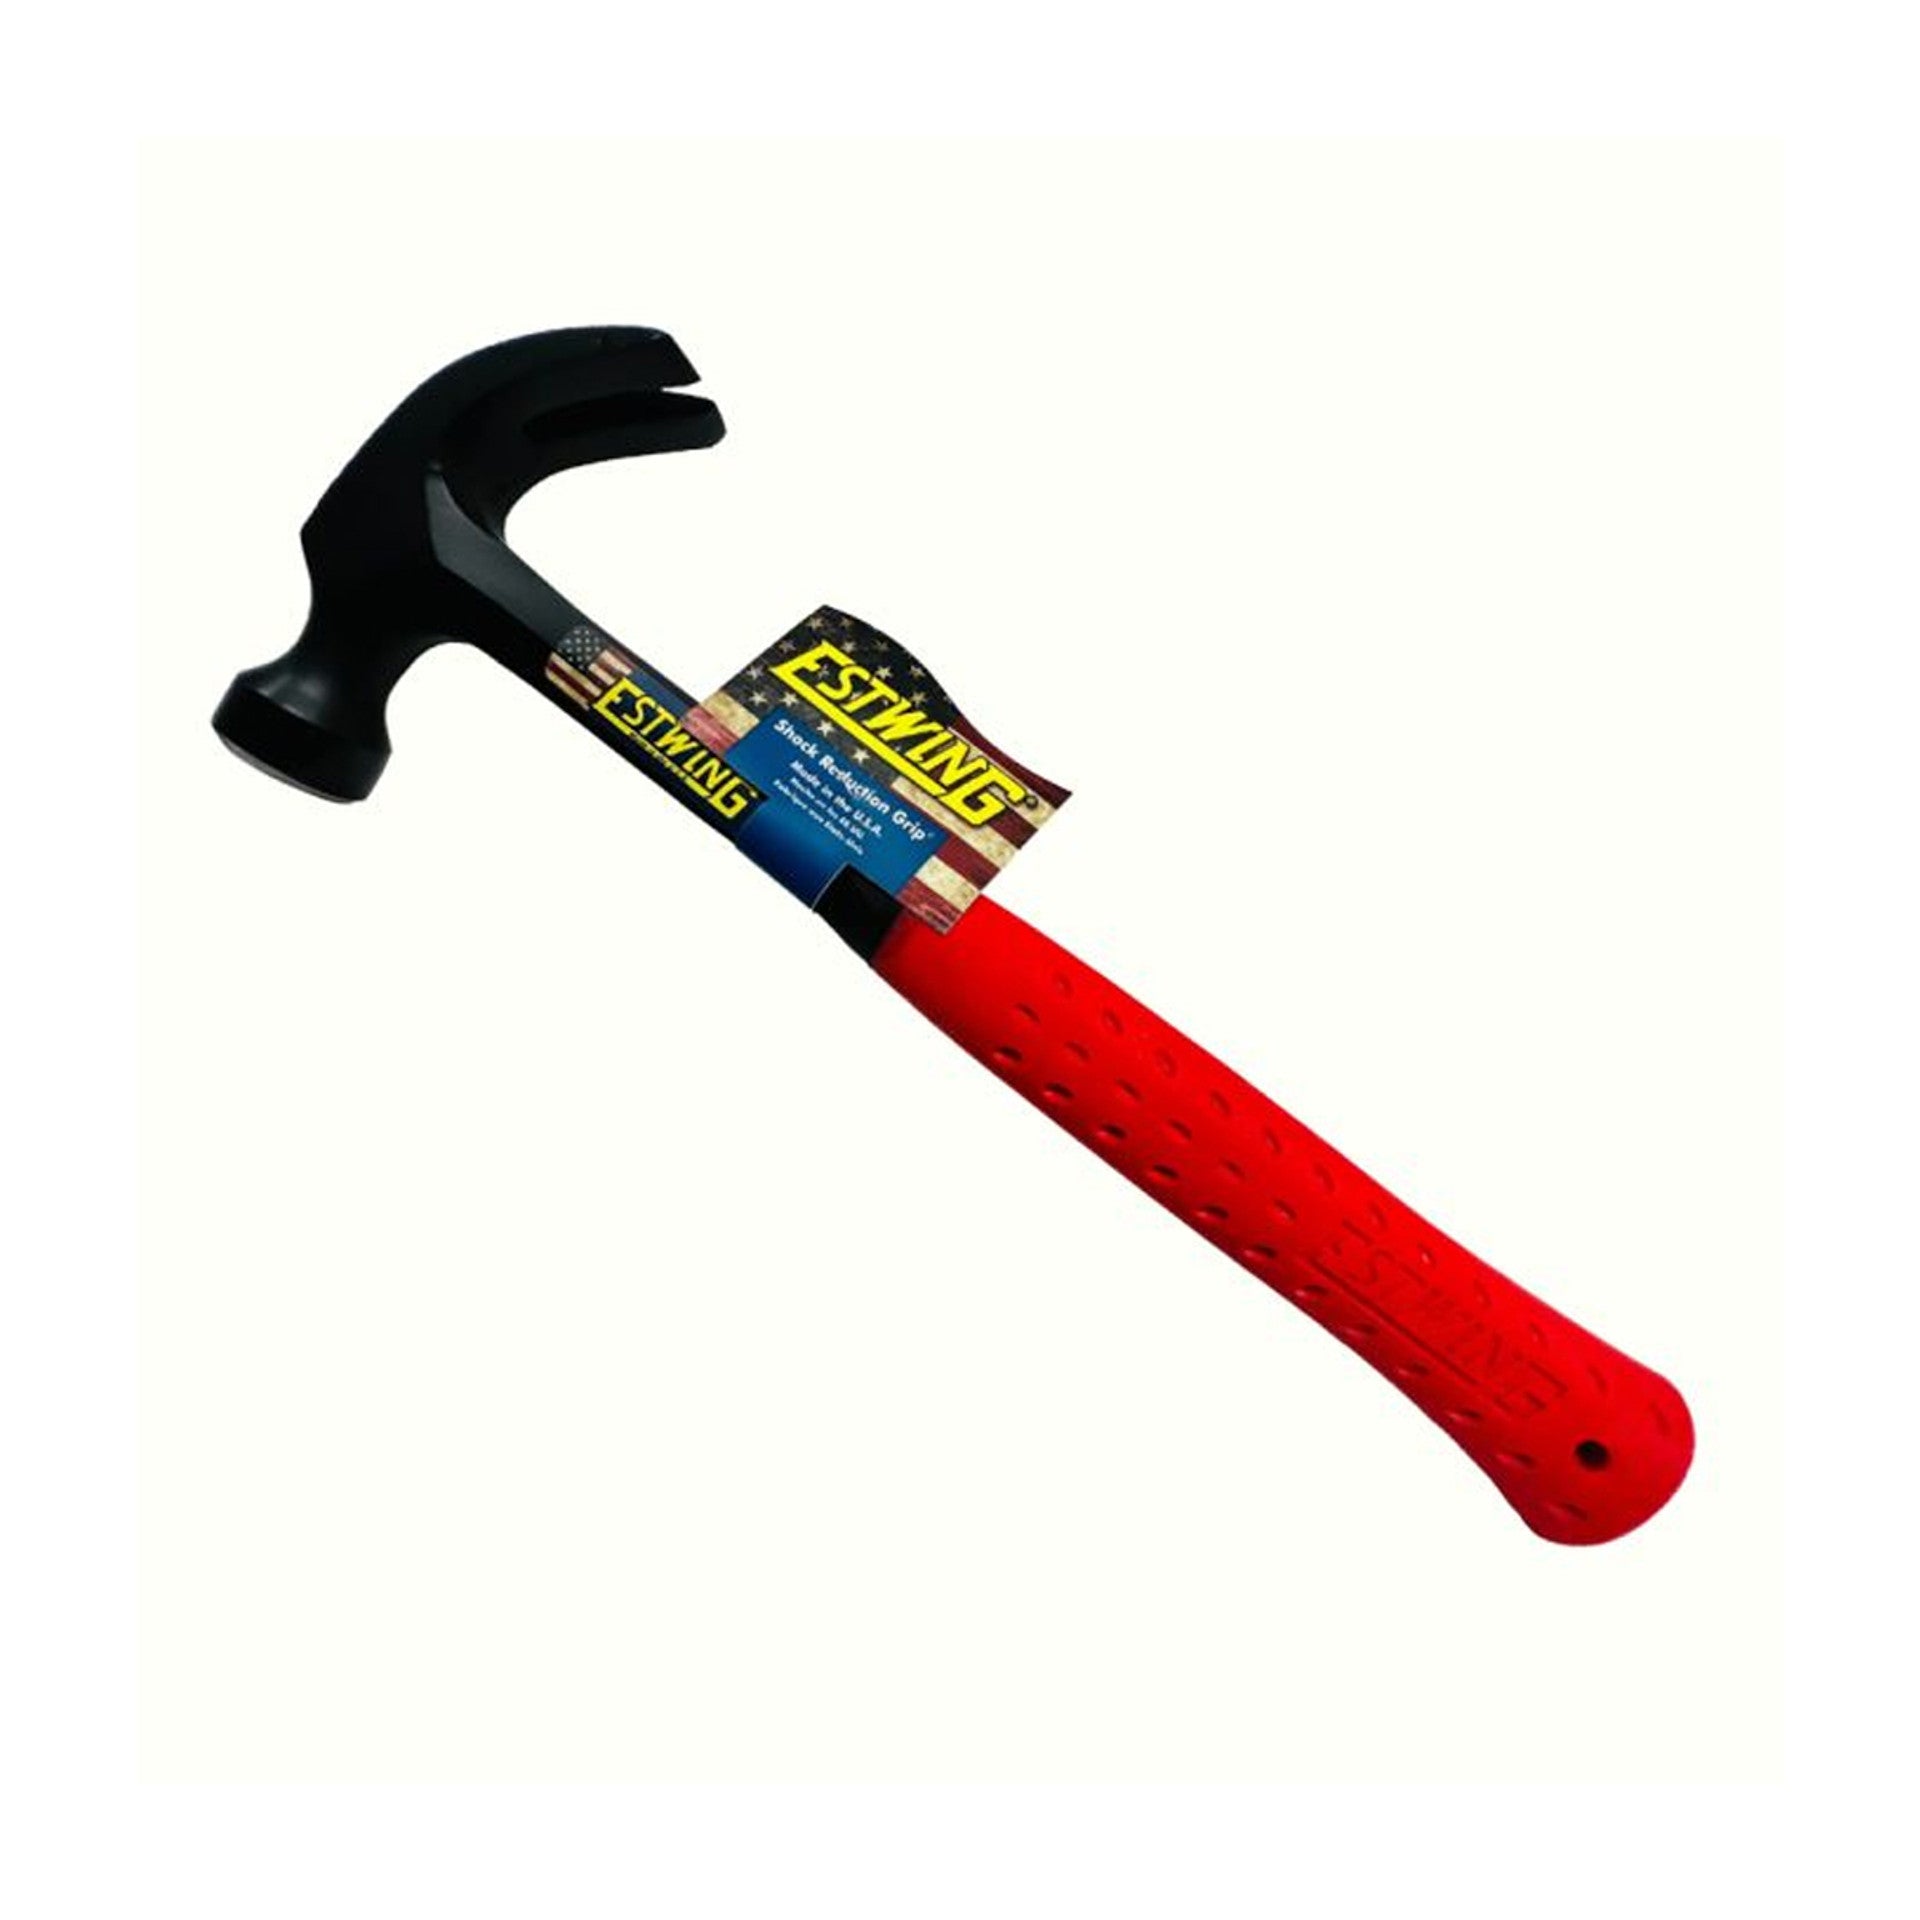 Estwing 20oz Curved Claw Hammer 0.56kg E320CRED